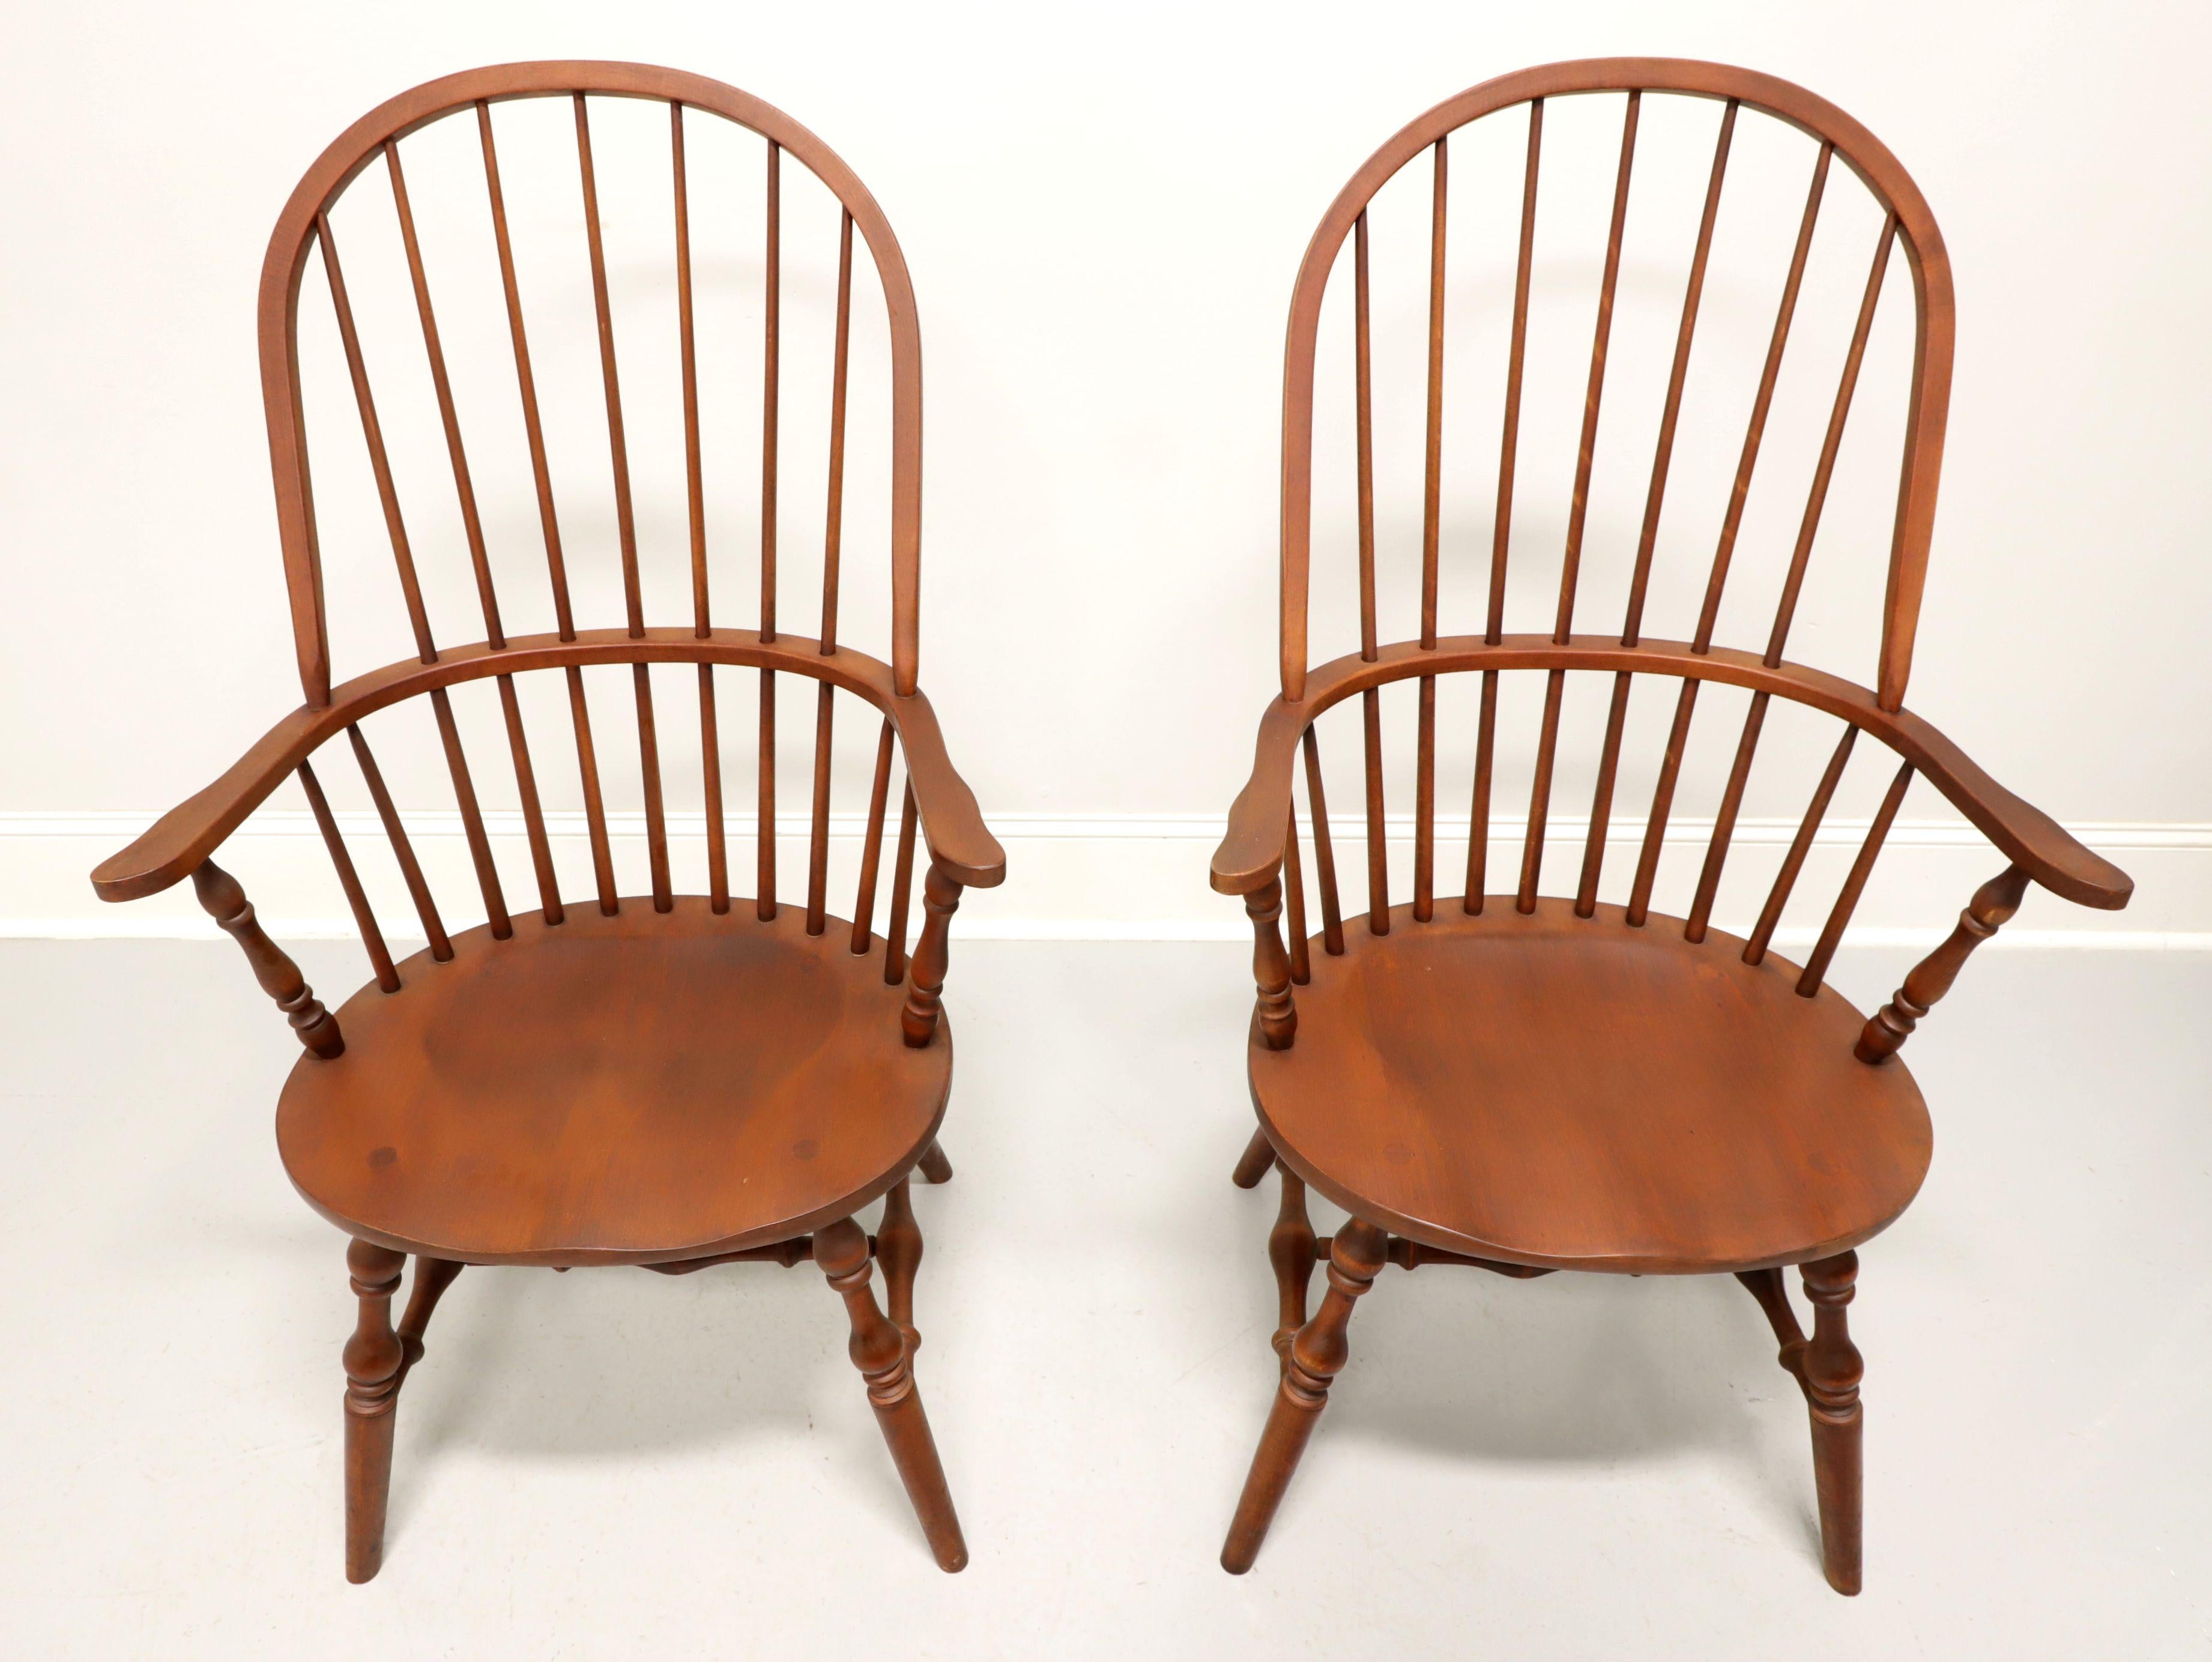 A pair of Windsor style dining armchairs by Habersham Plantation, of Toccoa, Georgia, USA. Solid maple, hoop back with spindles, curved arms with turned post supports, saddle shape seat, turned legs and stretchers. Made in the late 20th